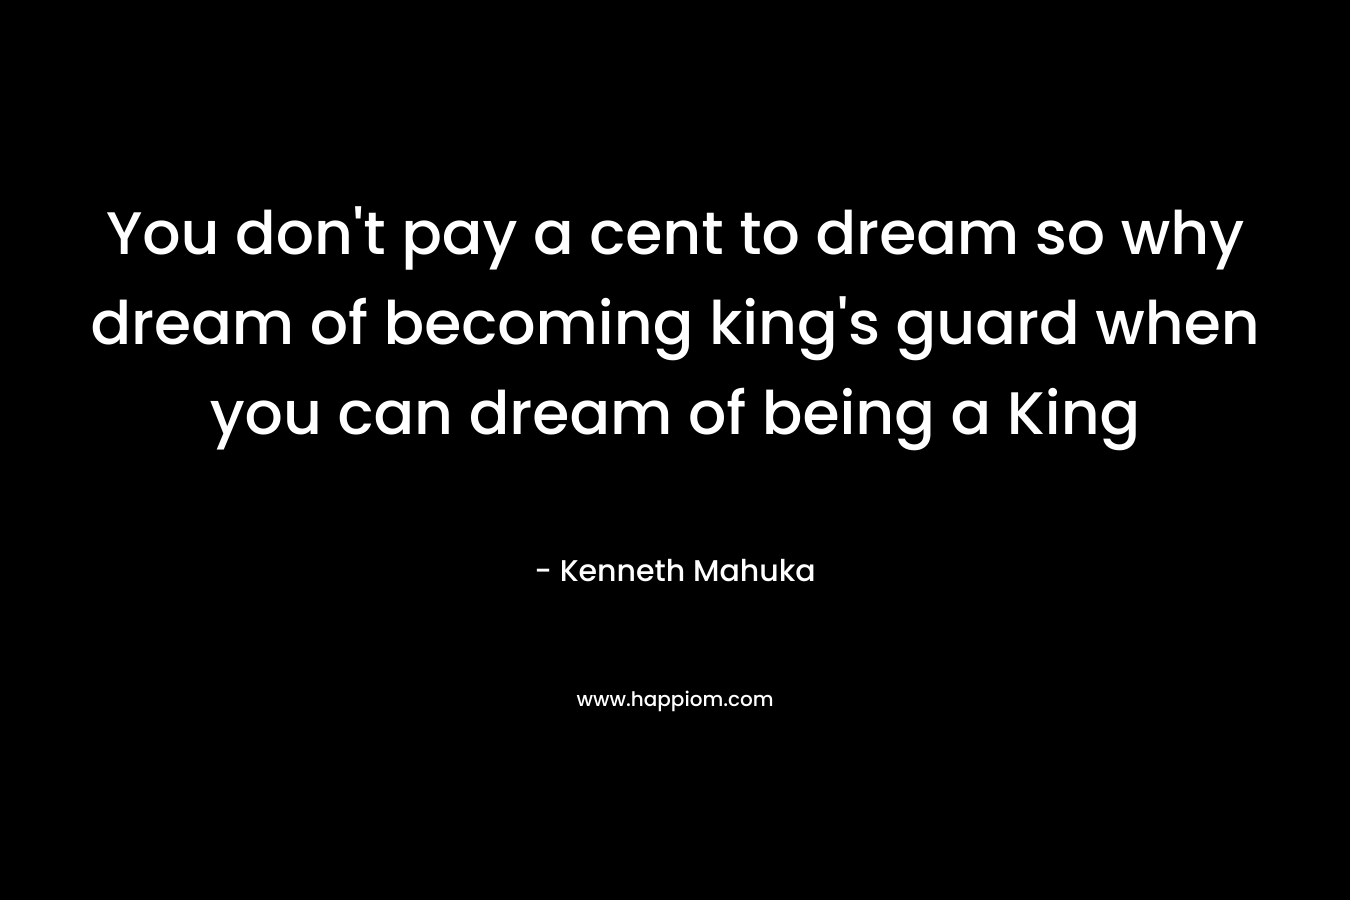 You don't pay a cent to dream so why dream of becoming king's guard when you can dream of being a King